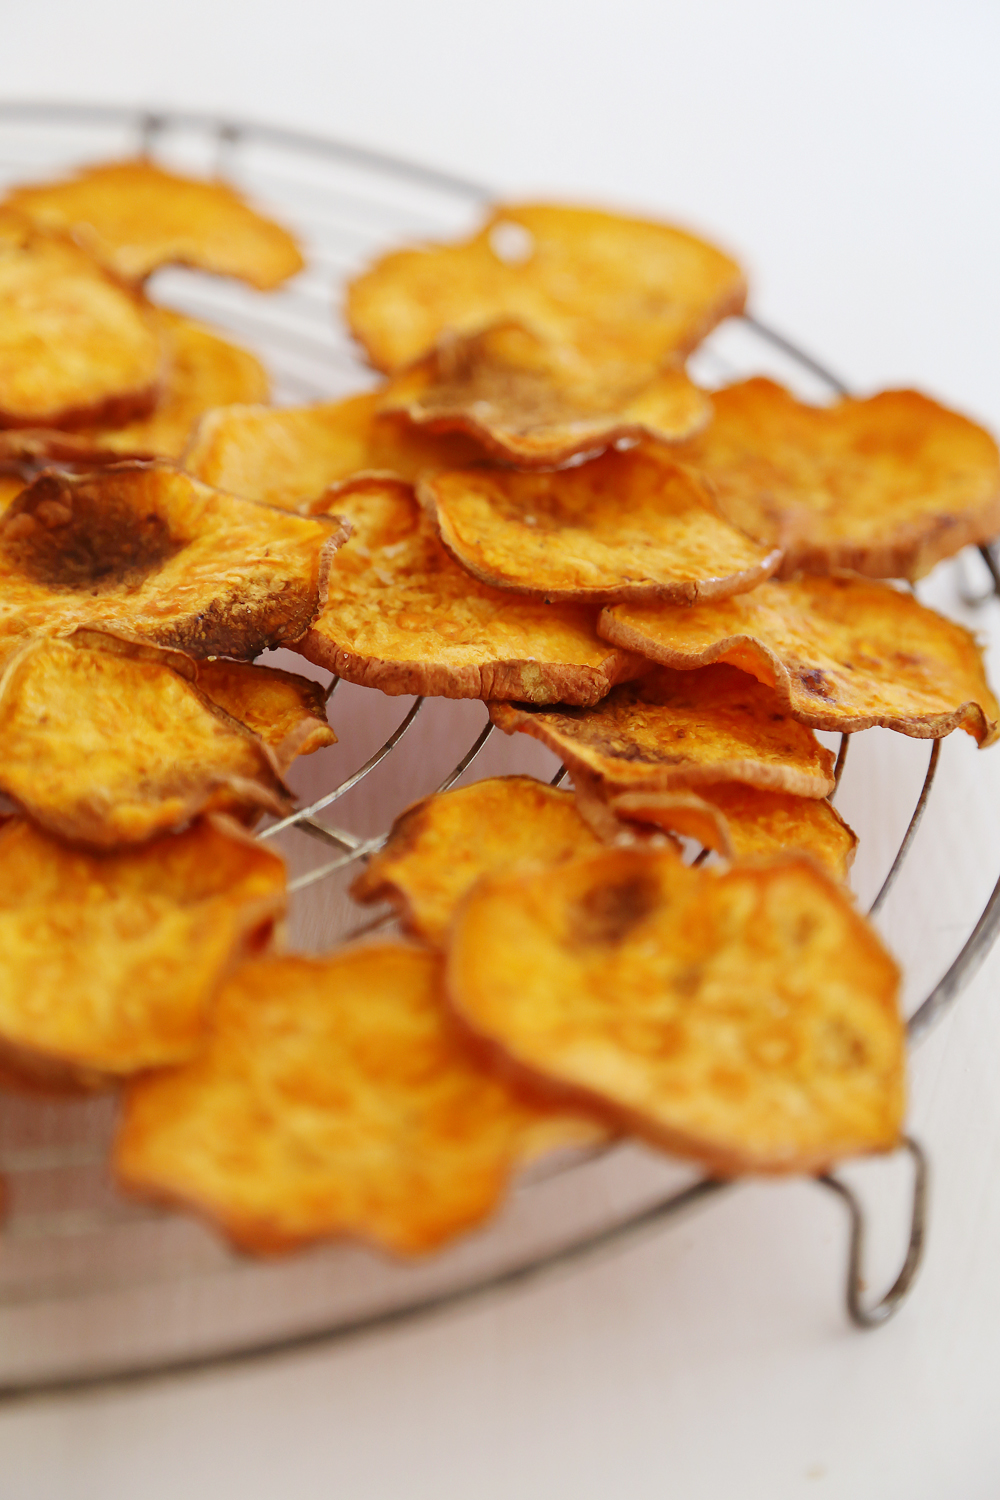 Baked Salt + Vinegar Sweet Potato Chips - Extra crispy, tangy sweet potato chips with just 3 ingredients! thecomfortofcooking.com